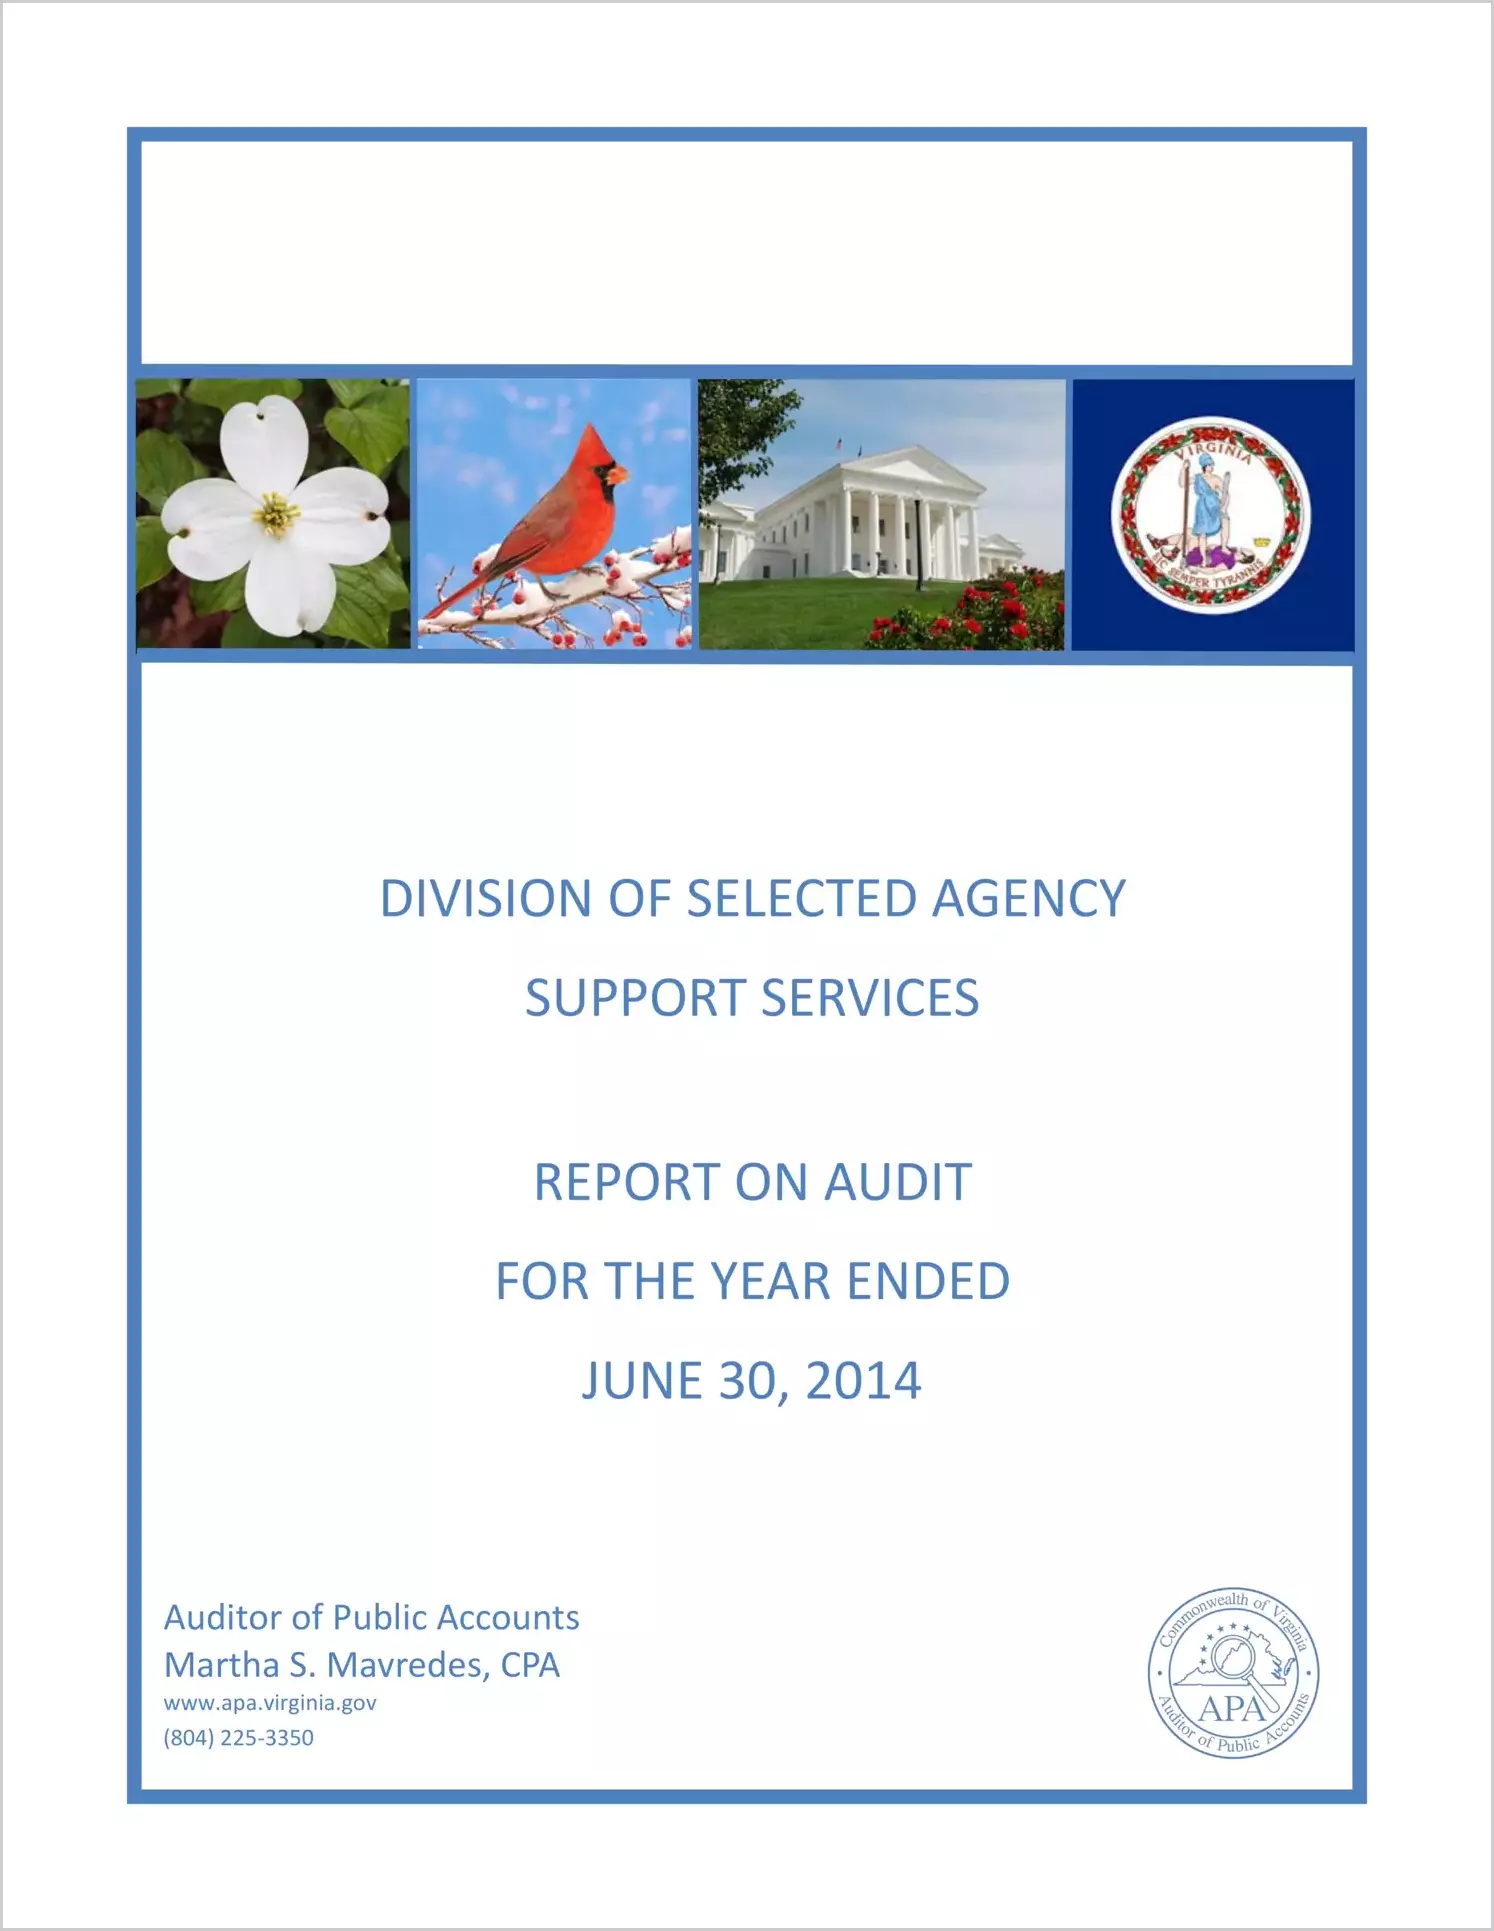 Division of Selected Agency Support Services for the year ended June 30, 2014